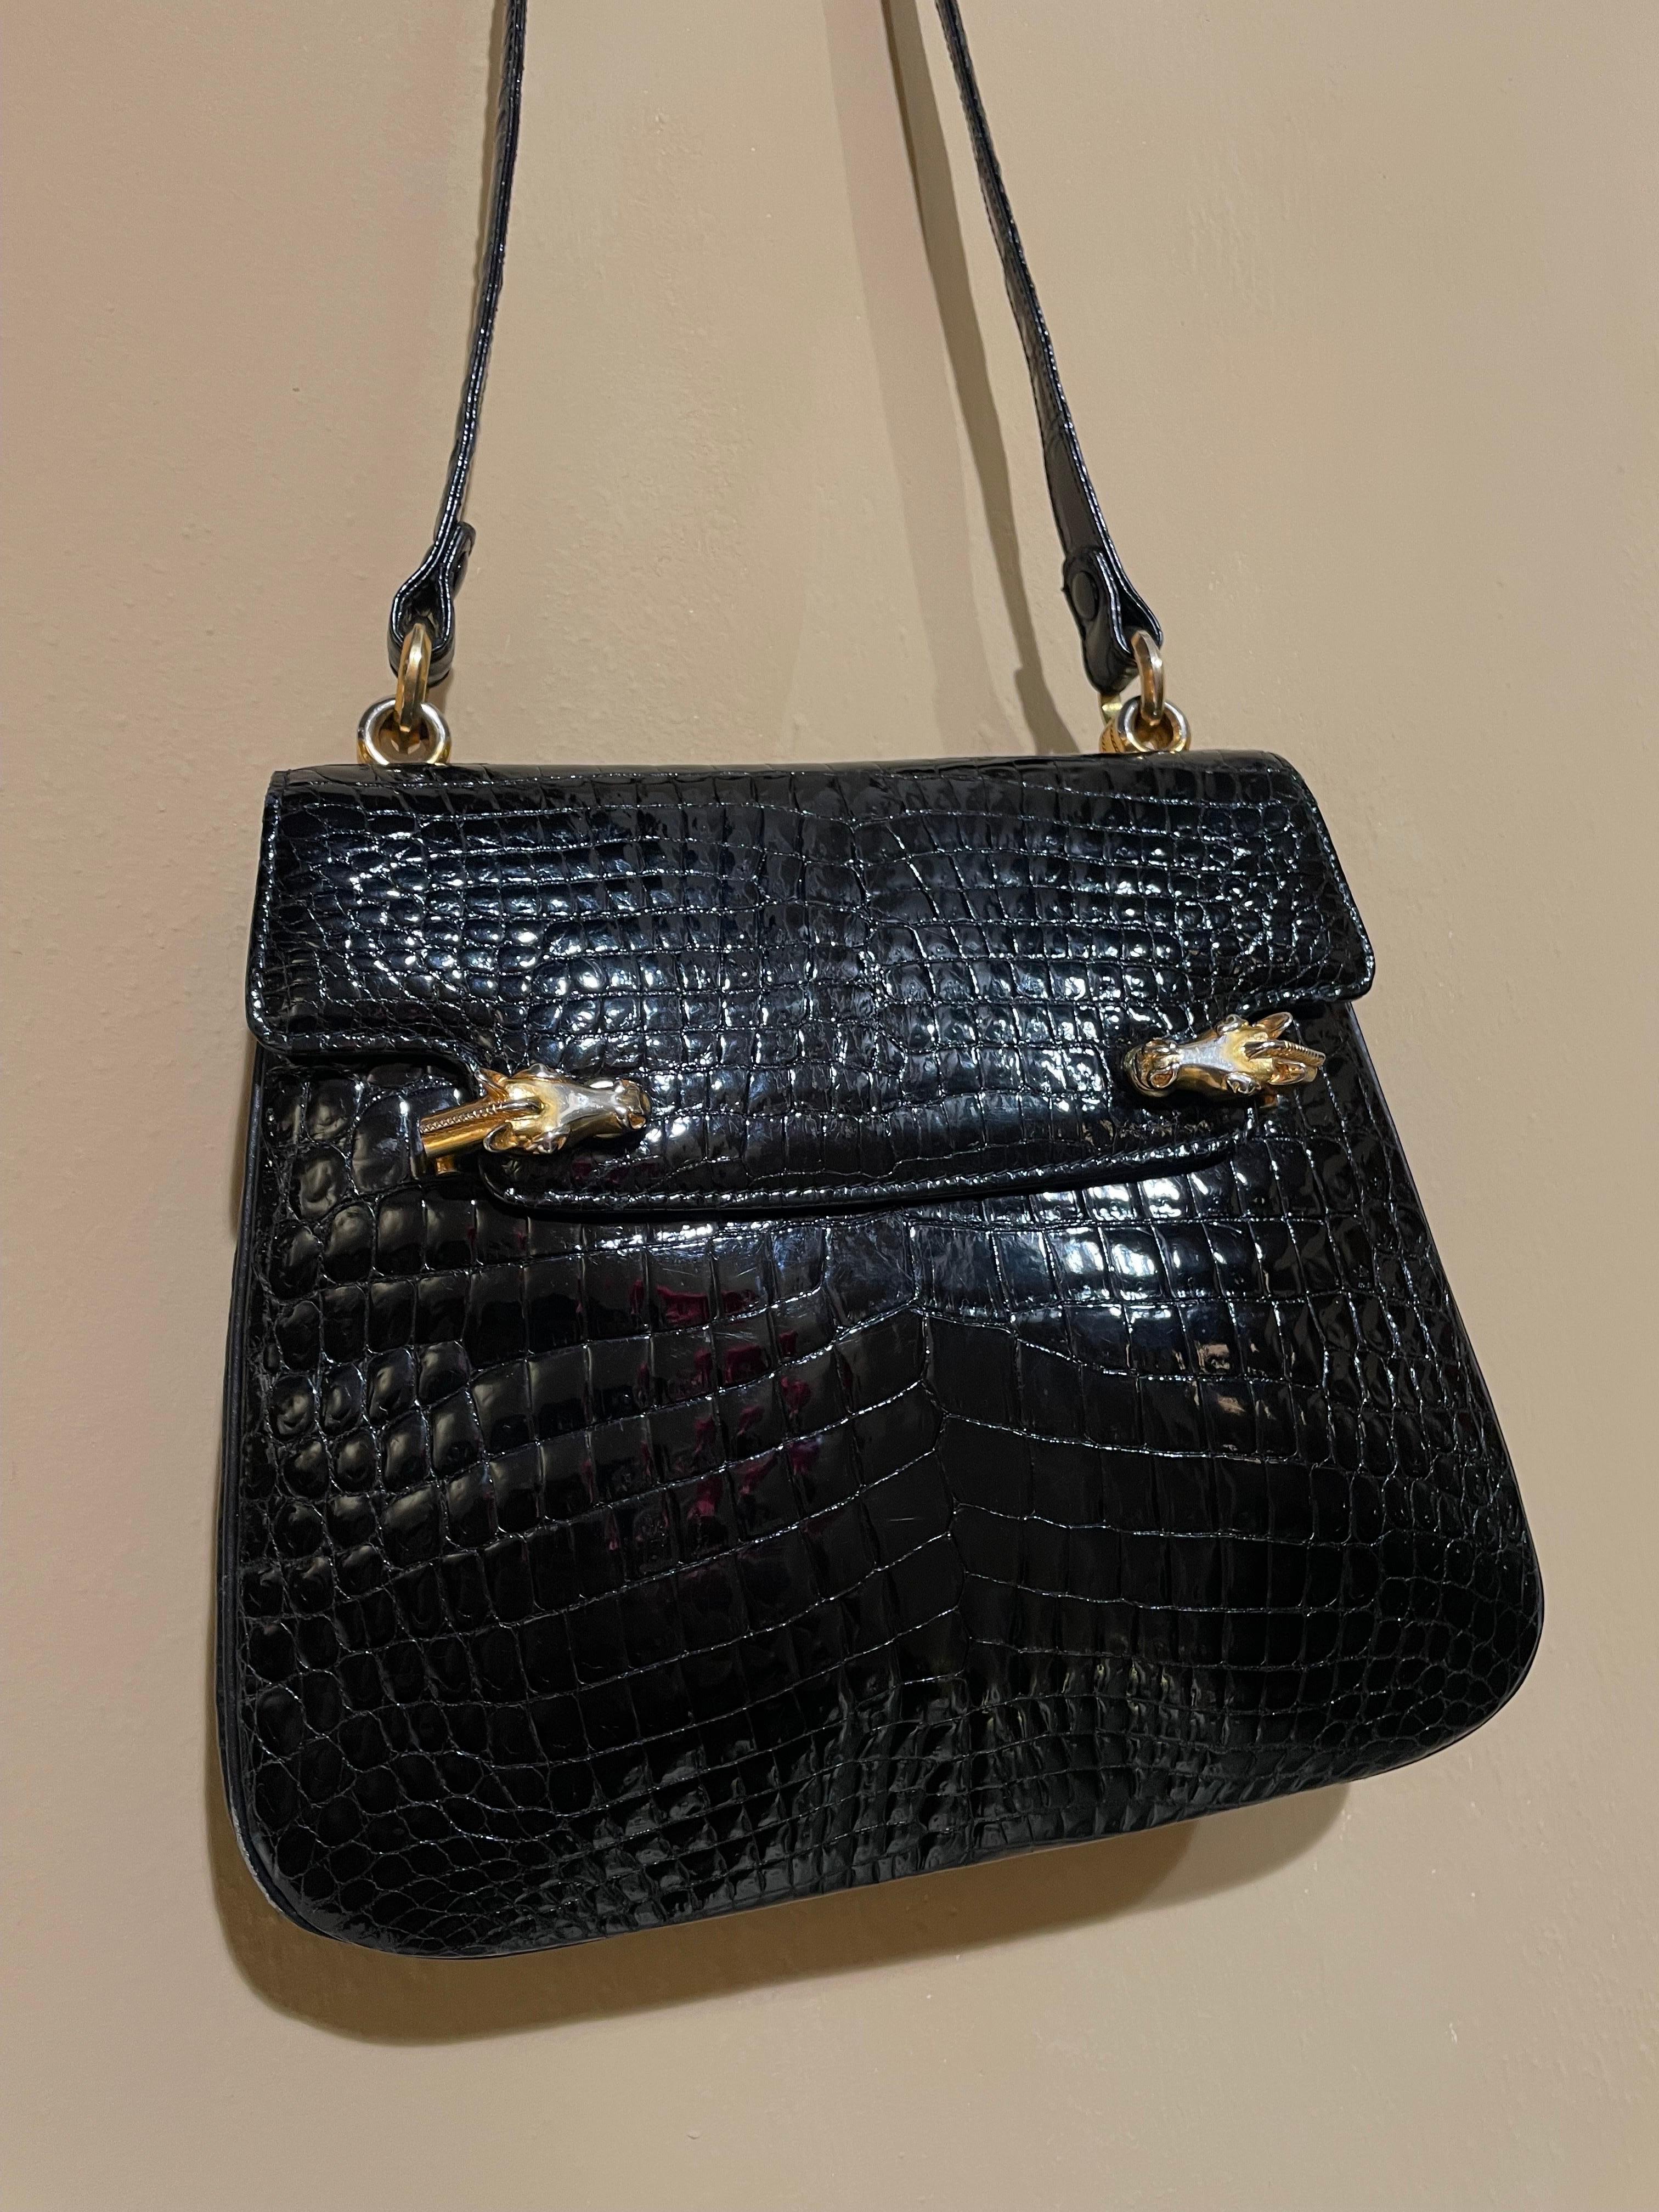 Gucci crocodile bag from 1960, the same model owned by Elisabeth Taylor.
Very special closure with flap and two golden metal horse heads that rise in interlocking. Interior consists of one pocket plus two side pockets, one of which is closed with